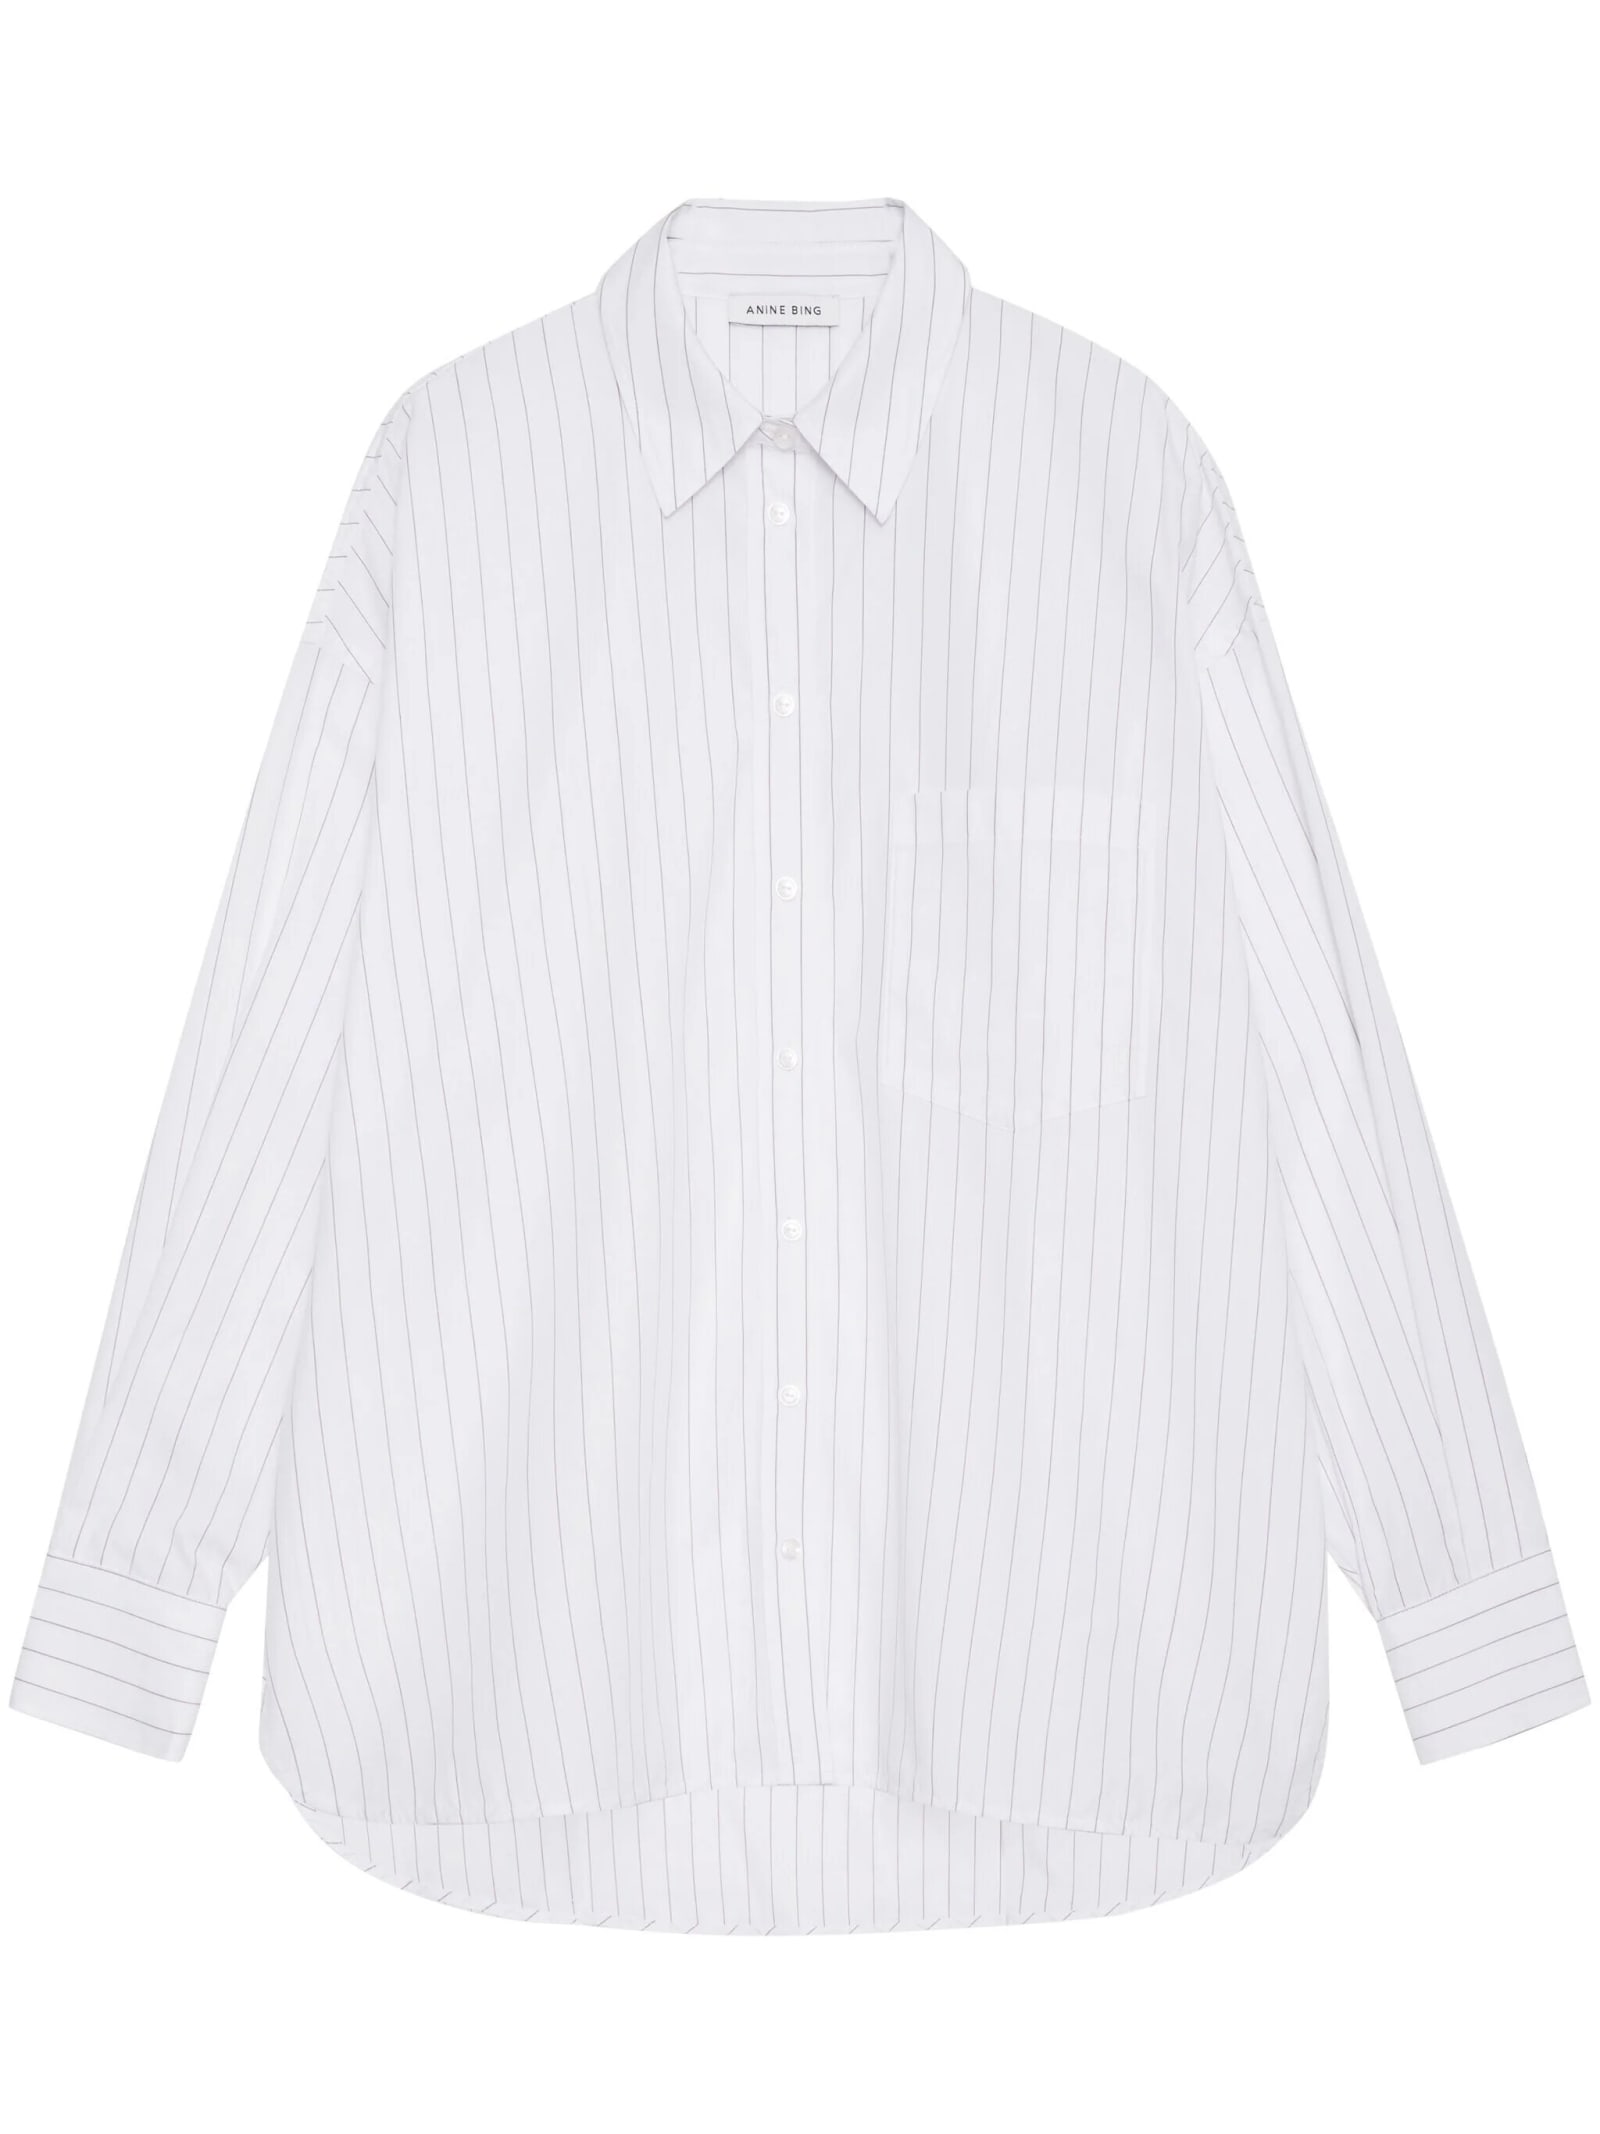 Shop Anine Bing Chrissy Shirt Stripe In White And Taupe